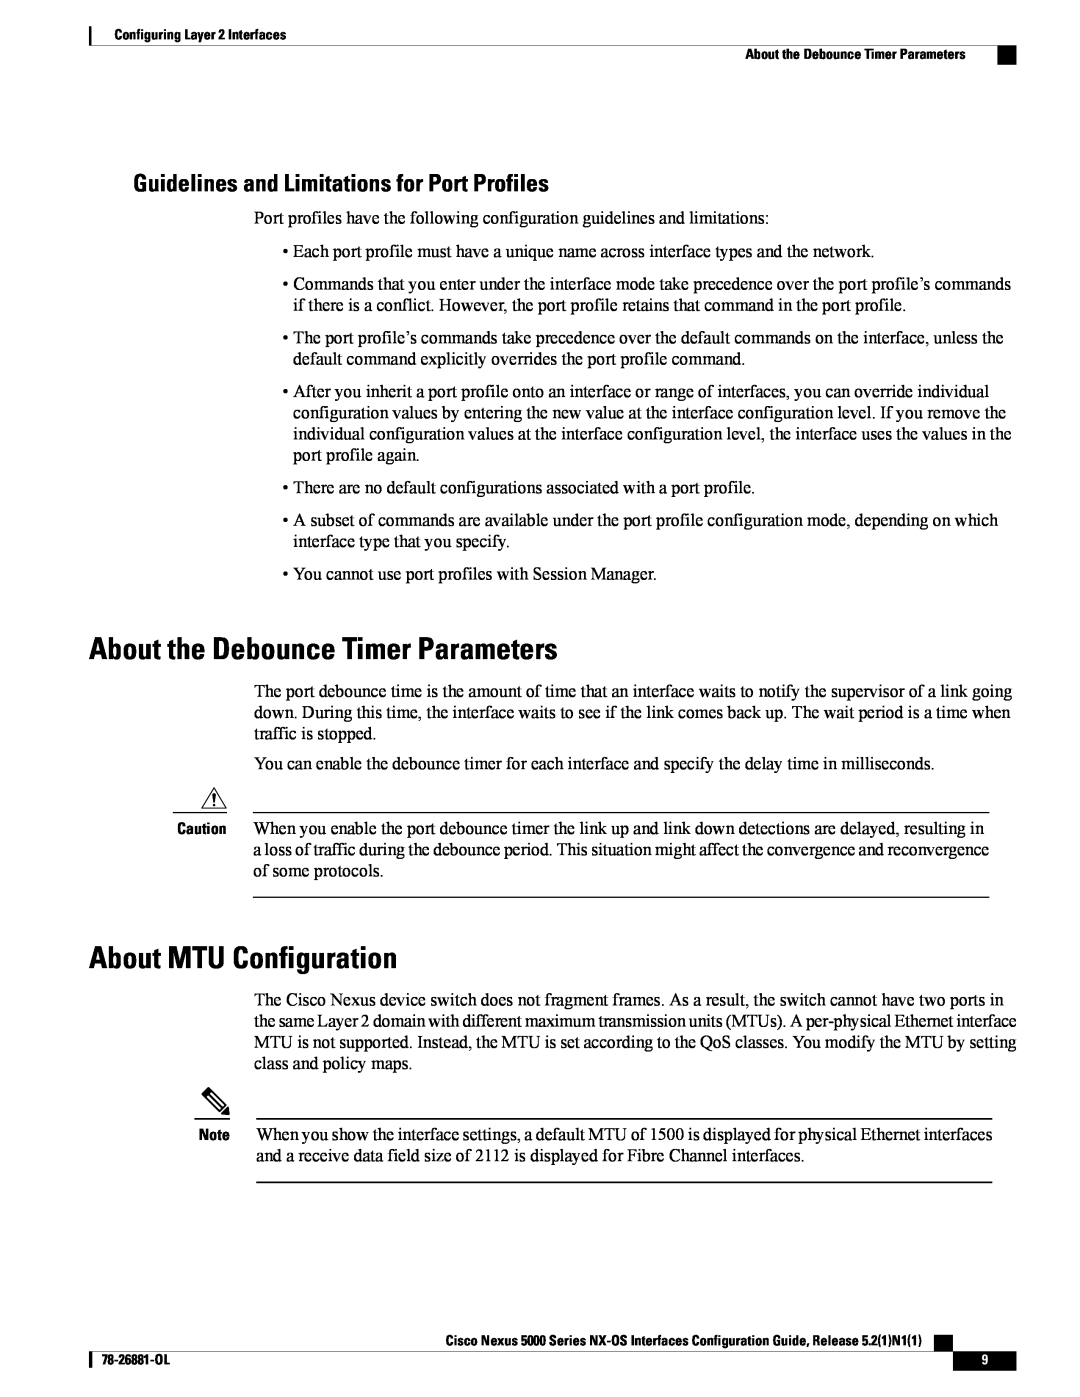 Cisco Systems N5KC5596TFA manual About the Debounce Timer Parameters, About MTU Configuration 